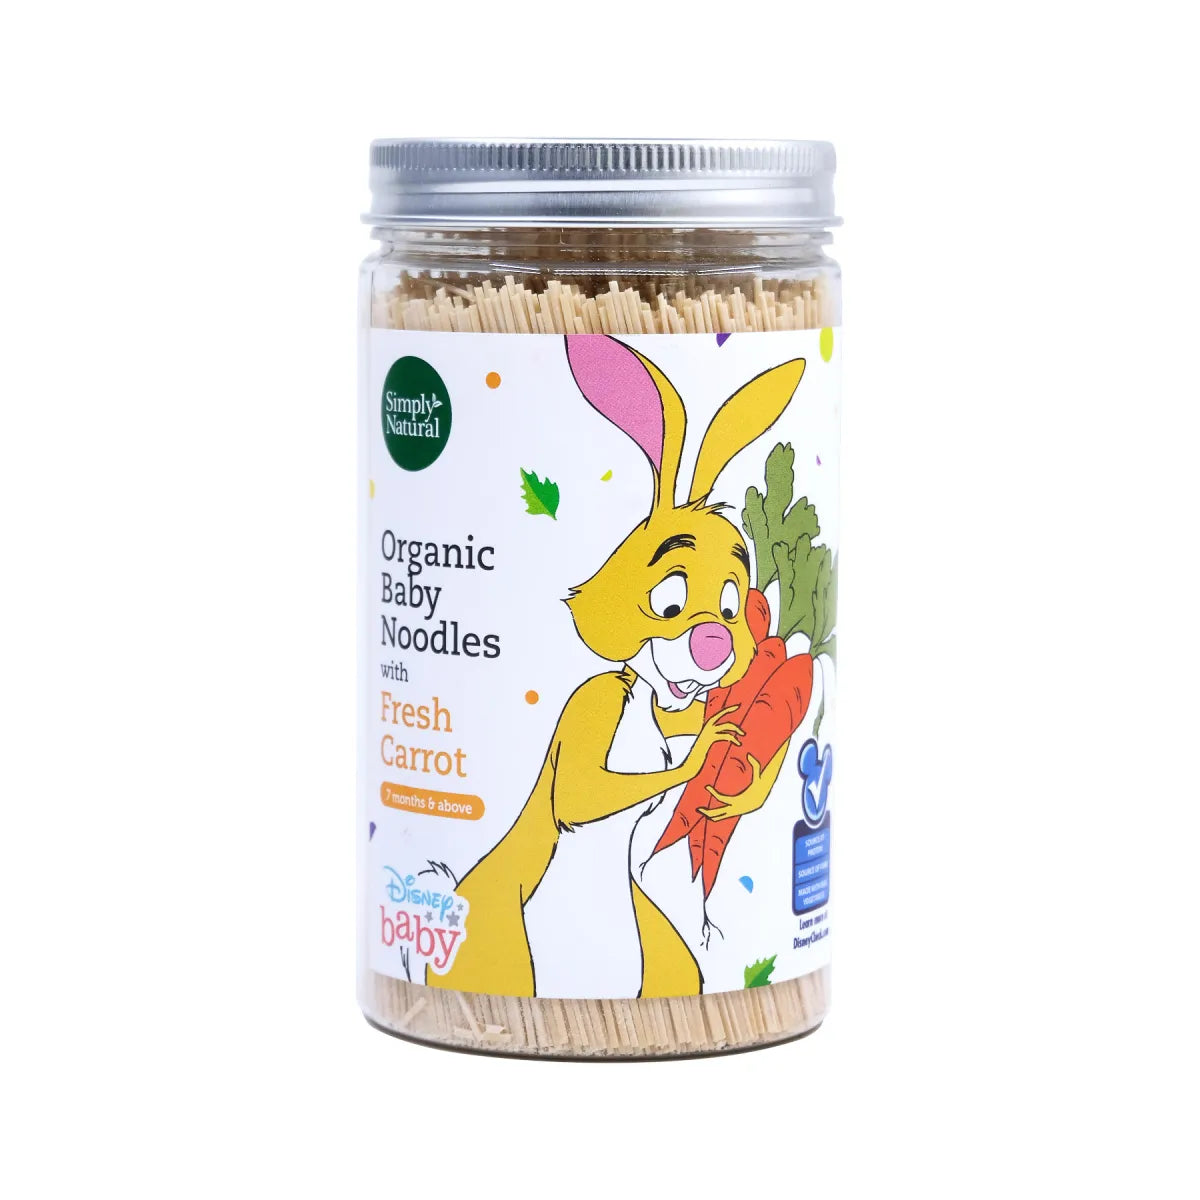 Simply Natural Organic Baby Thin Noodles with Fresh Carrot 200g